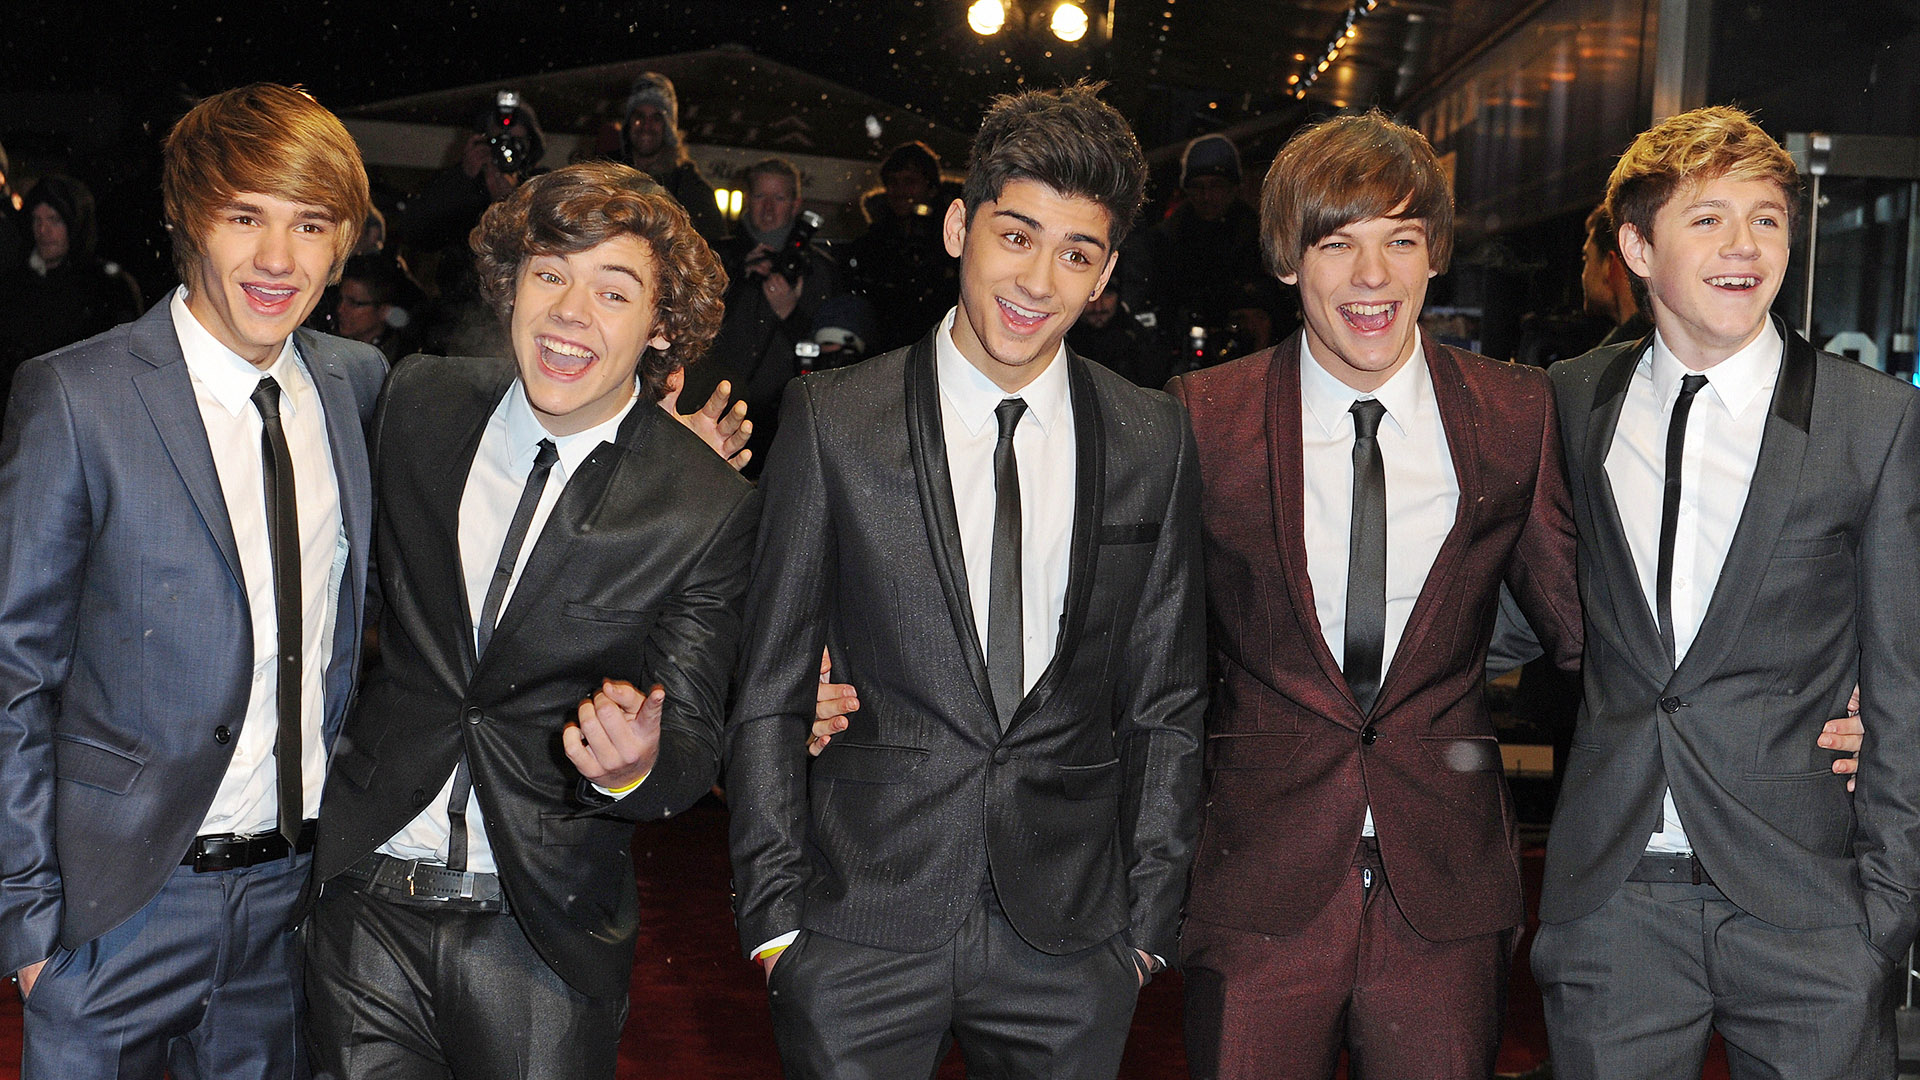 Then & Now: See One Direction's First & Most Recent Red Carpet Pics